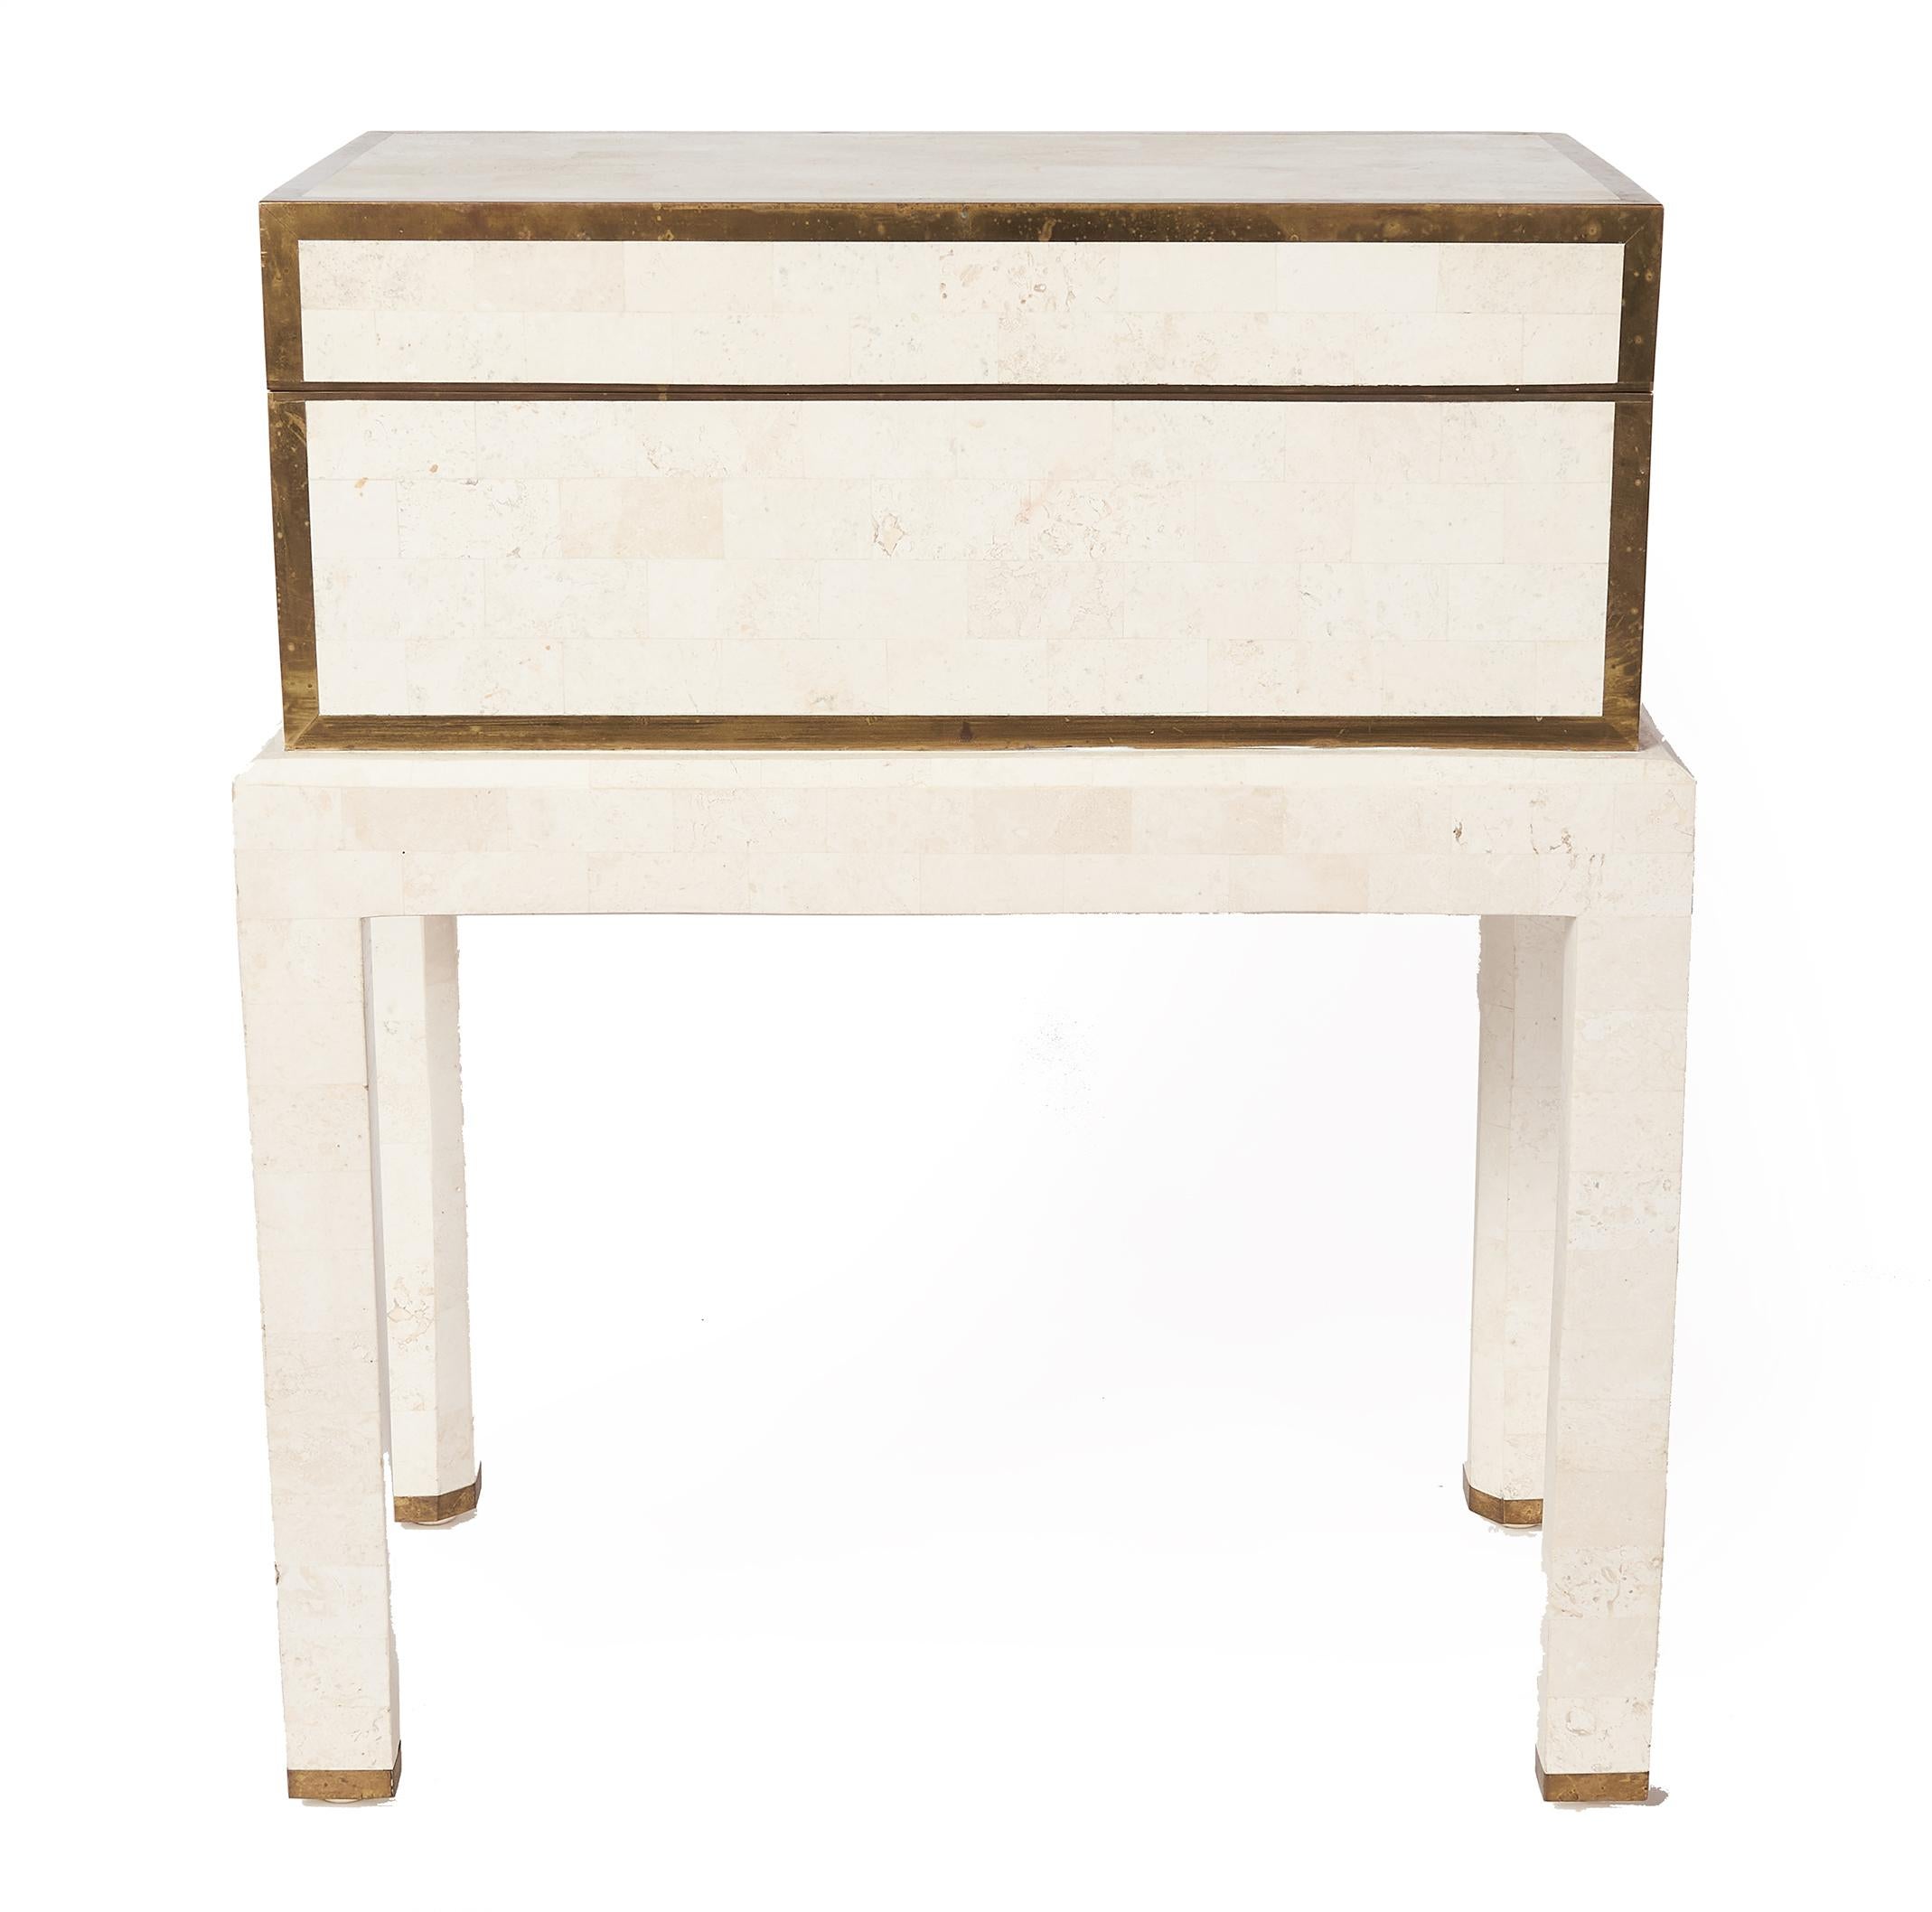 Elegant Mid-Century Modern box by Maitland-Smith is made of white tessellated stone with brass inlay around the edges. The stylishly designed box sits on top of four legs offering convenient access. The unique design has a top that opens up to a